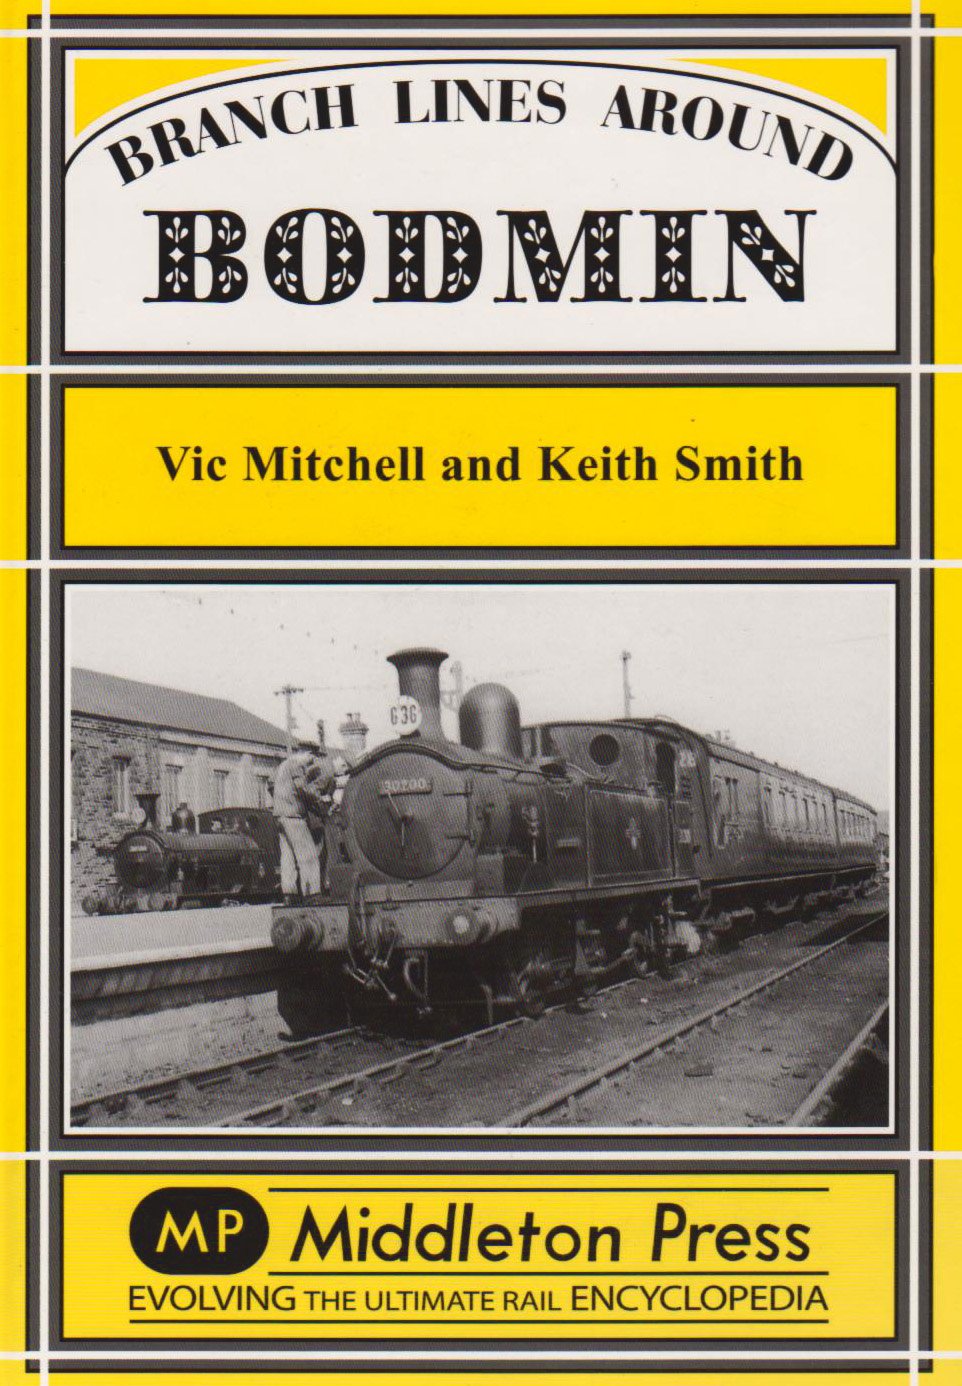 Branch Lines around Bodmin OUT OF PRINT TO BE REPRINTED